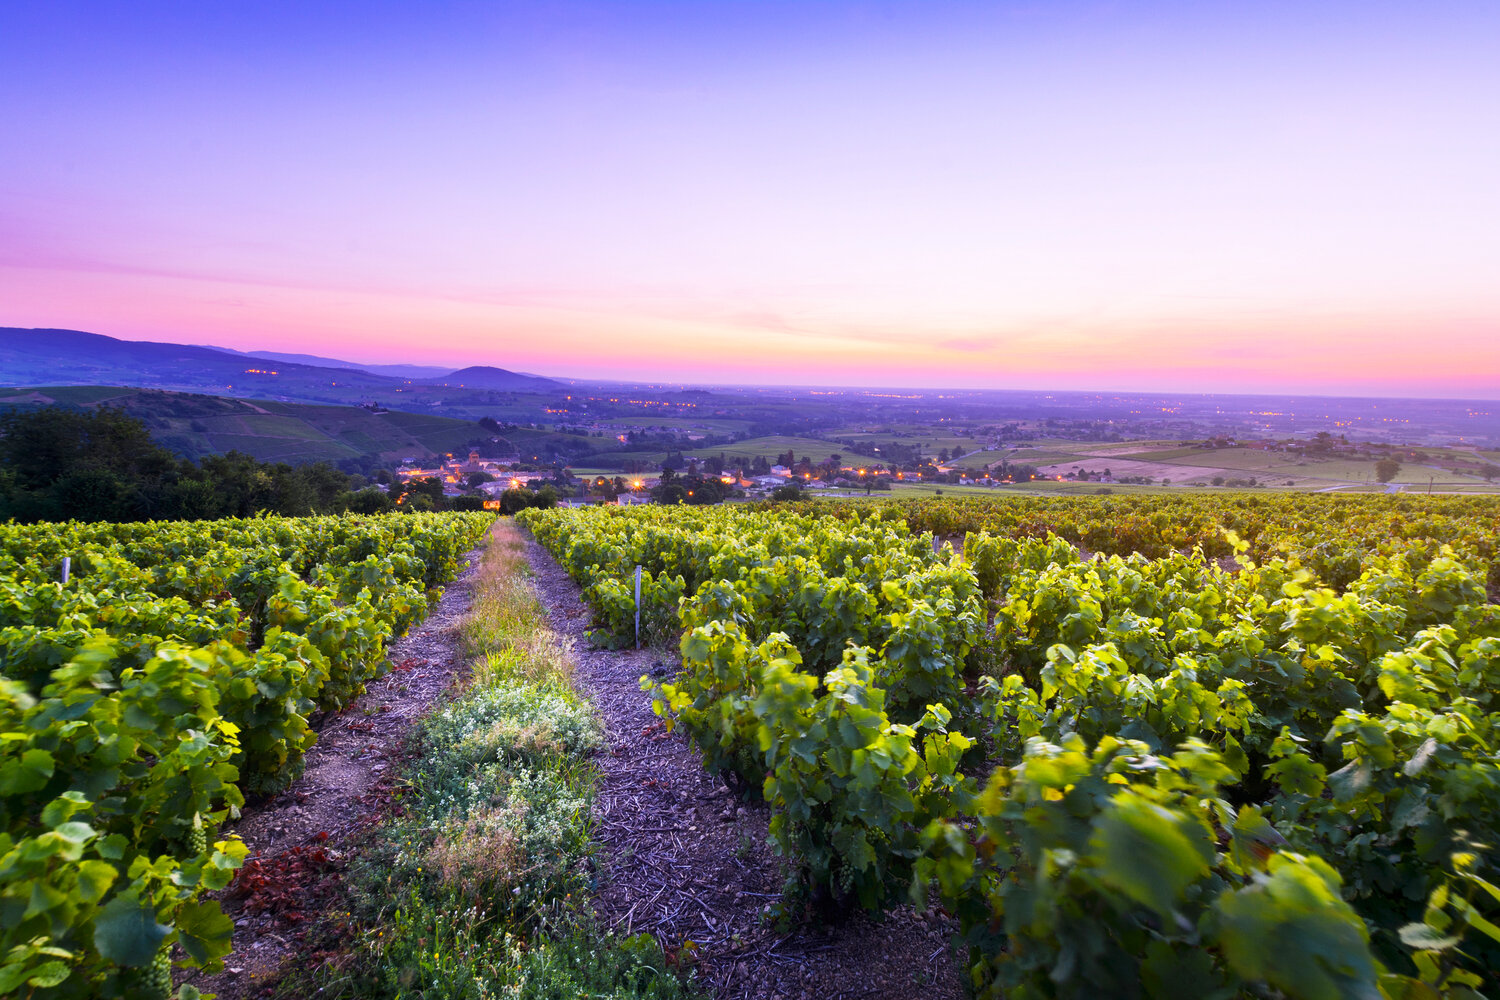 The Beaujolais region is just south of Burgundy and west/northwest of Lyon along the Saone River.